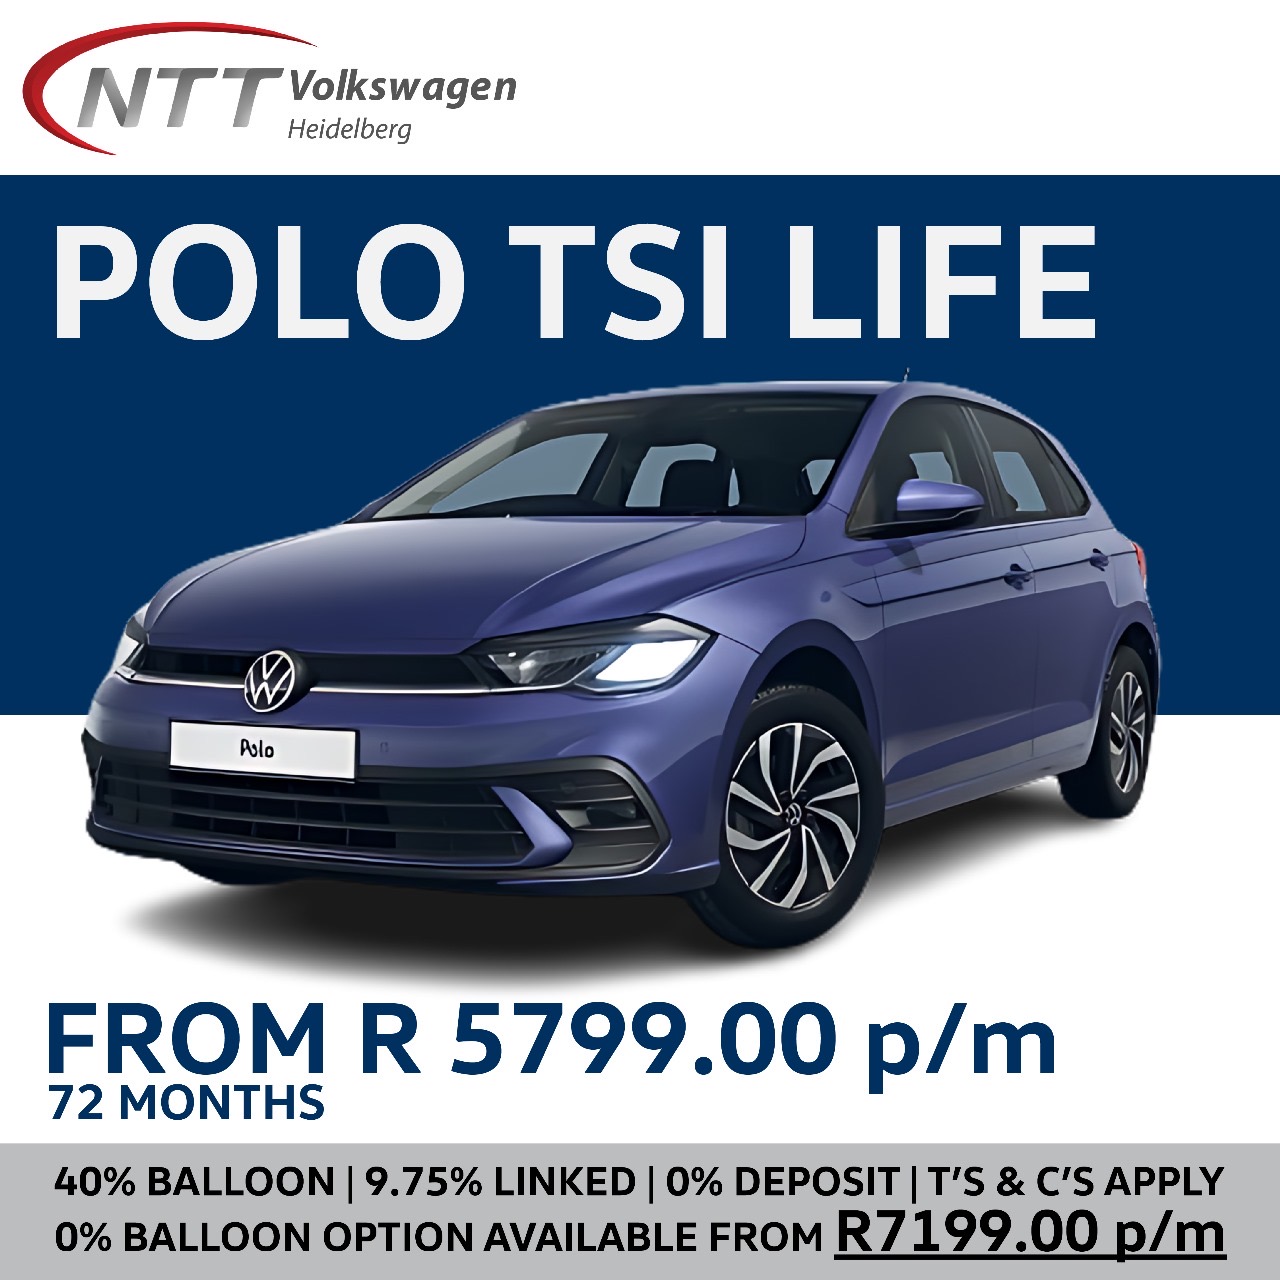 POLO TSI LIFE - NTT Volkswagen - New, Used & Demo Cars for Sale in South Africa